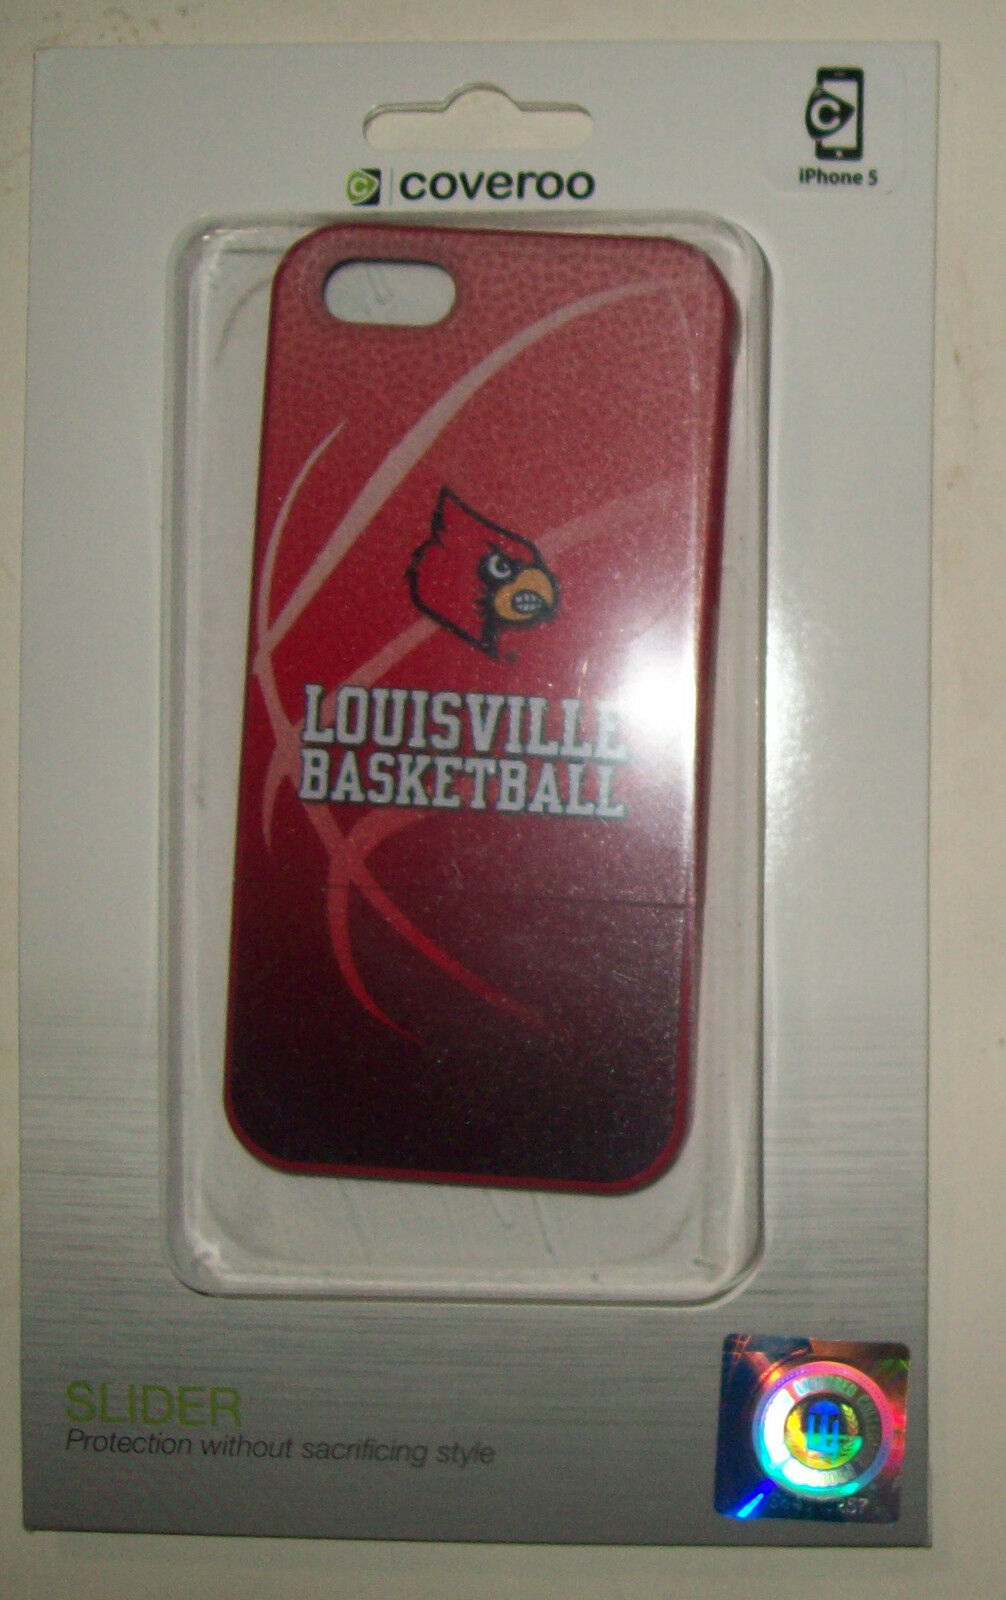 Louisville Cardinals Coveroo Slider Case Iphone 5 ncaa college new sealed